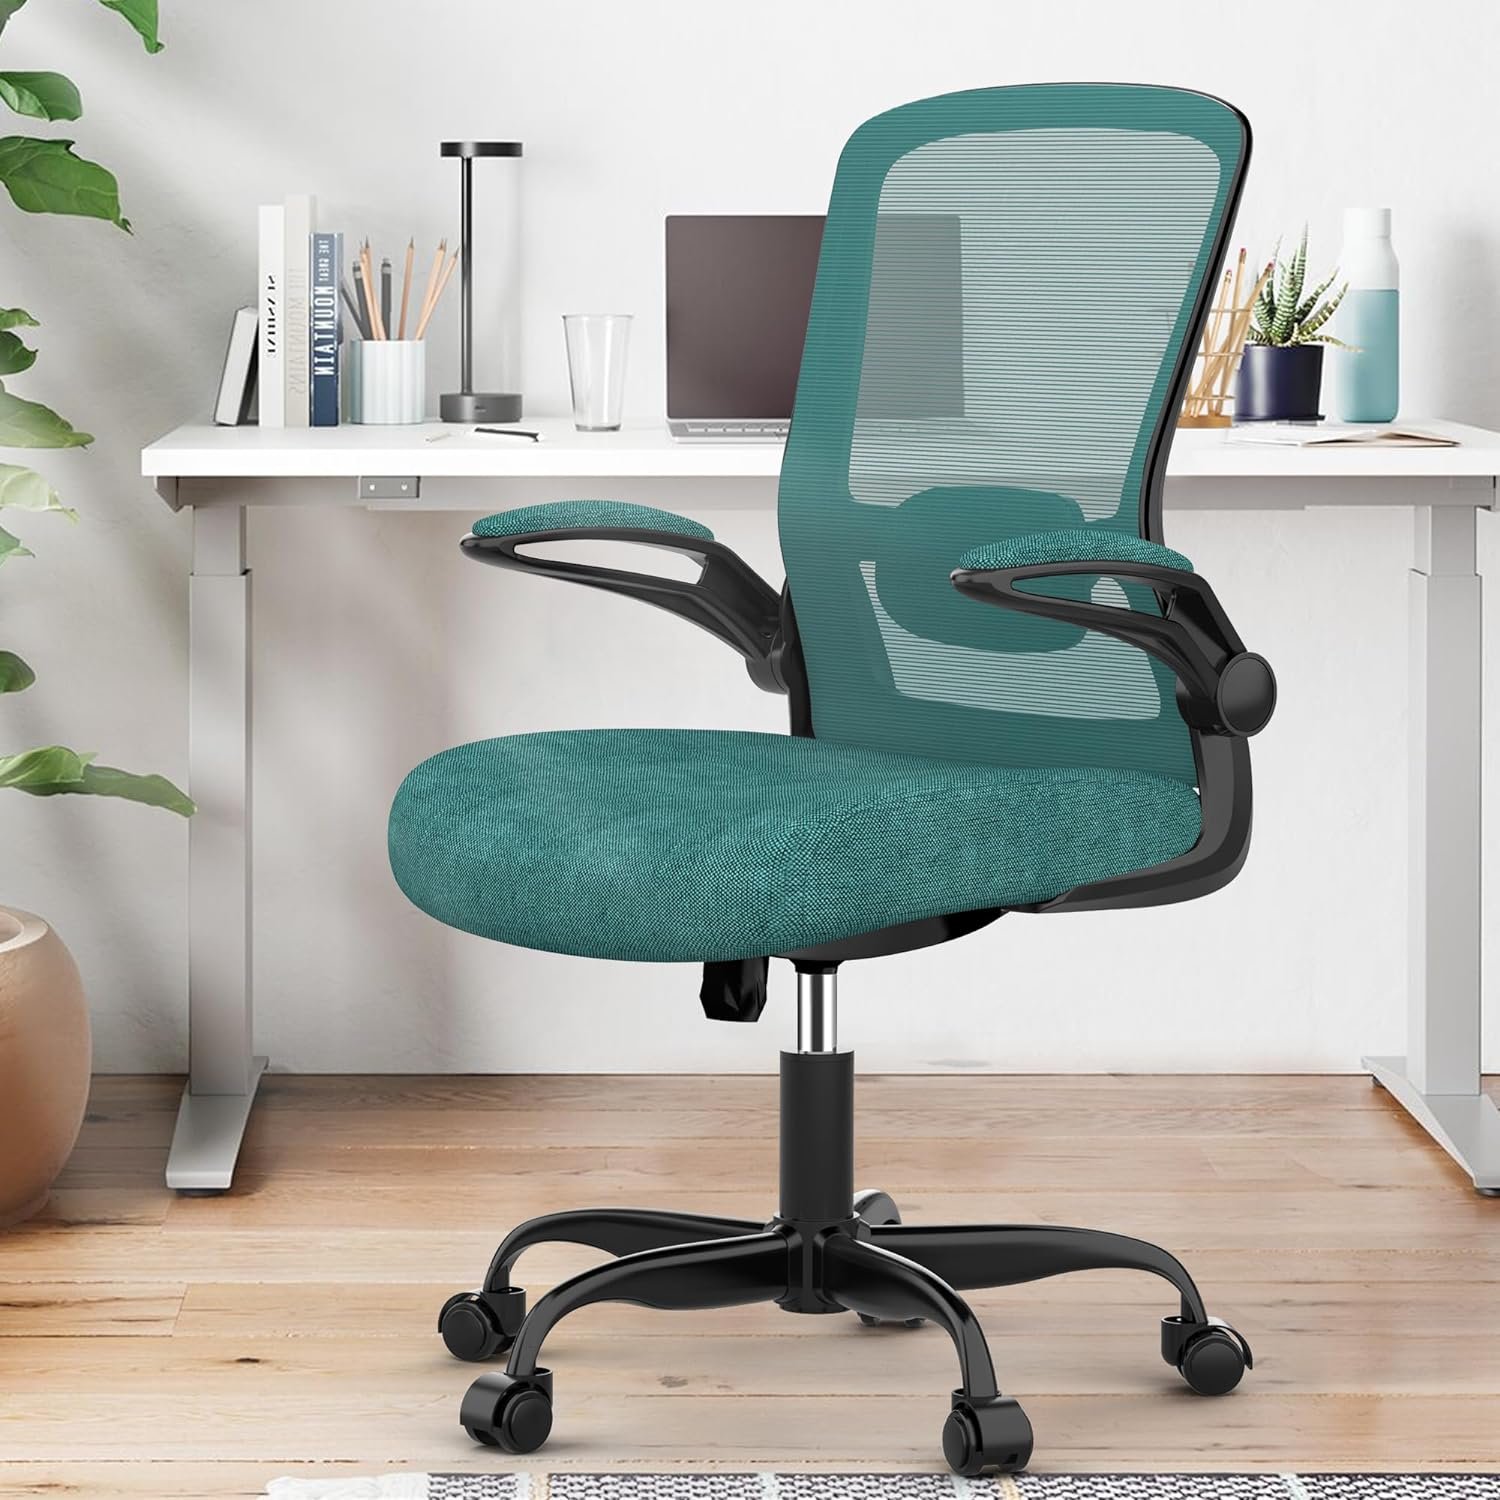 Office Chair Review